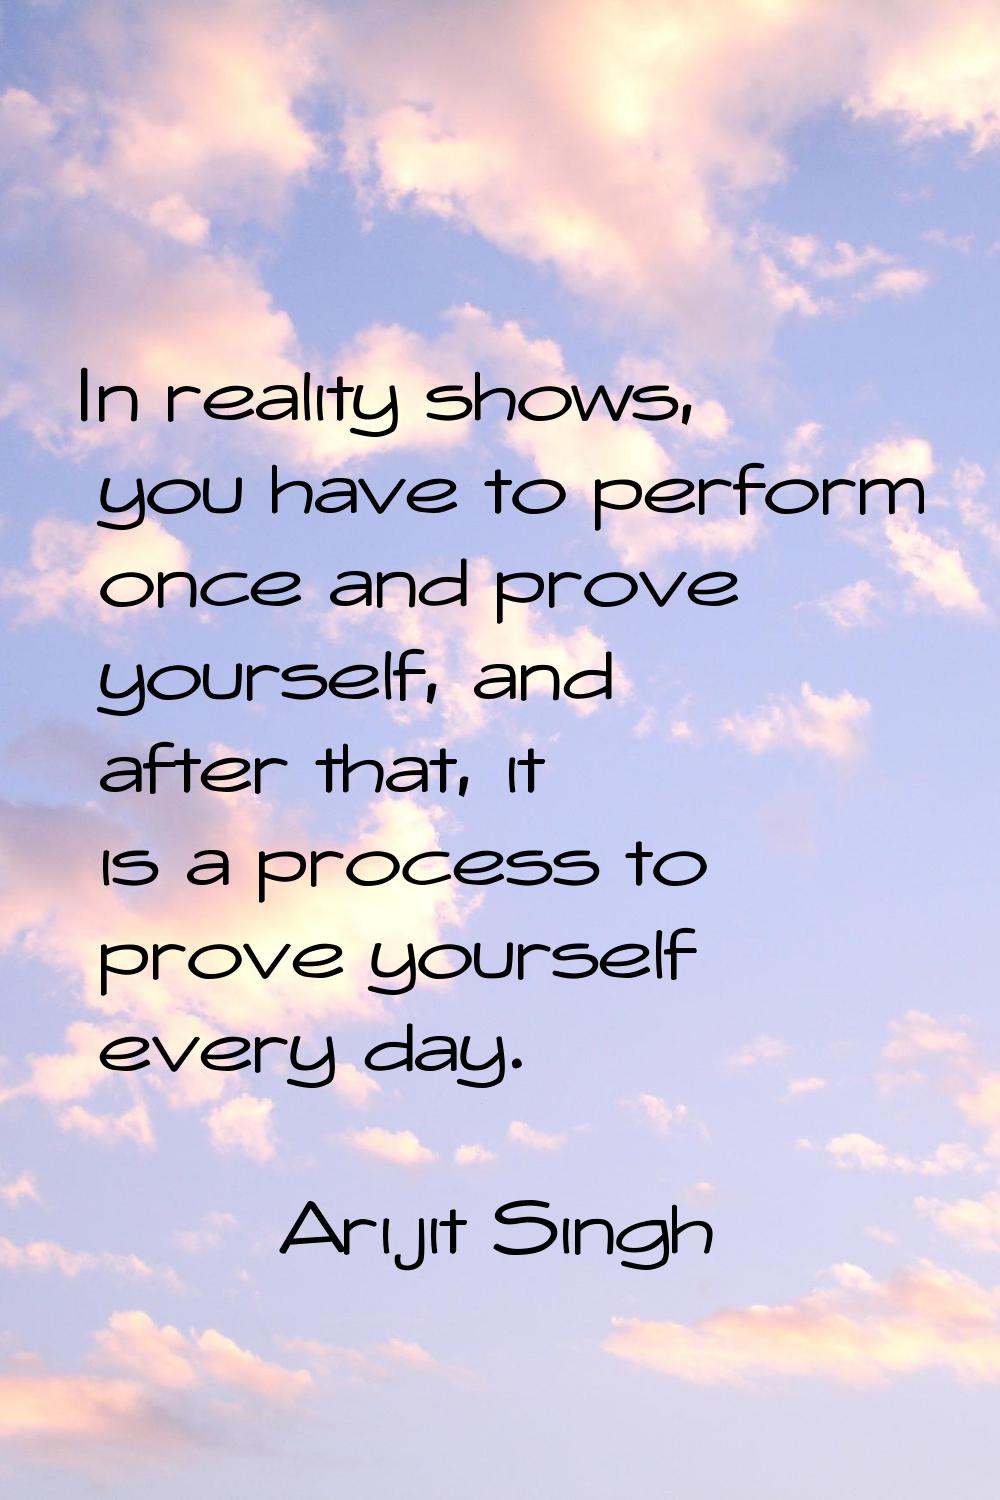 In reality shows, you have to perform once and prove yourself, and after that, it is a process to p